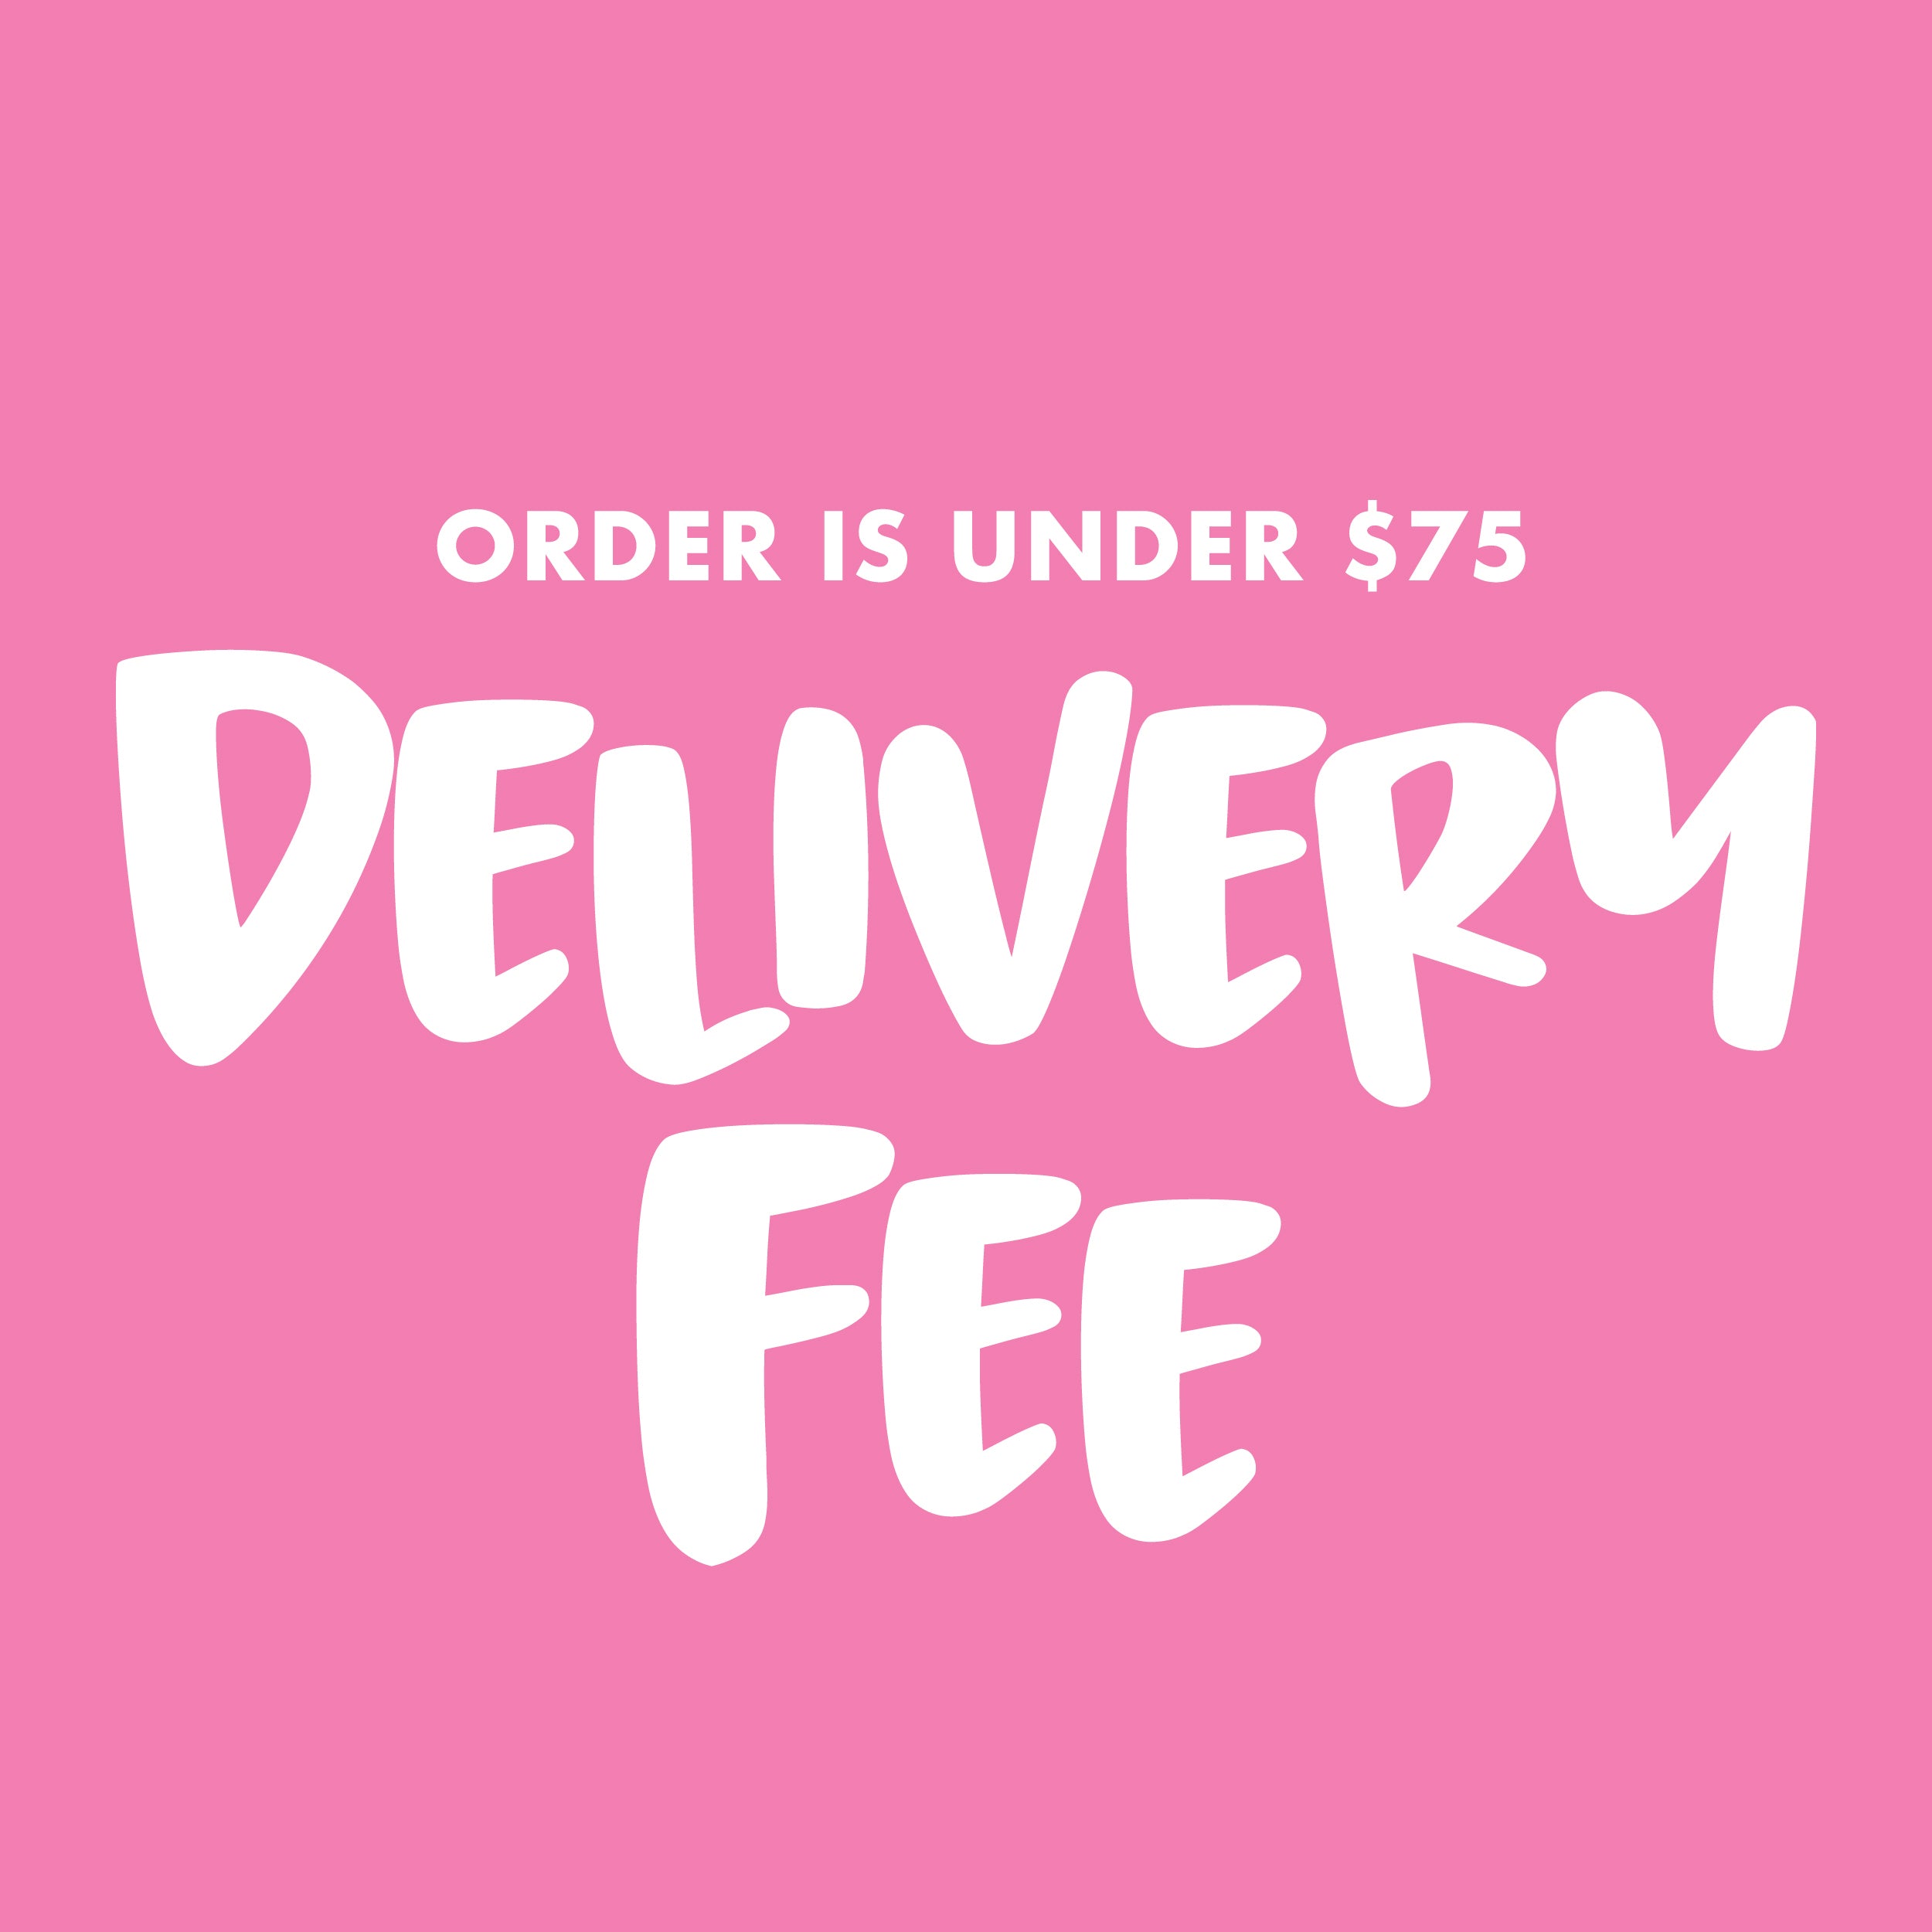 Add Delivery Fee